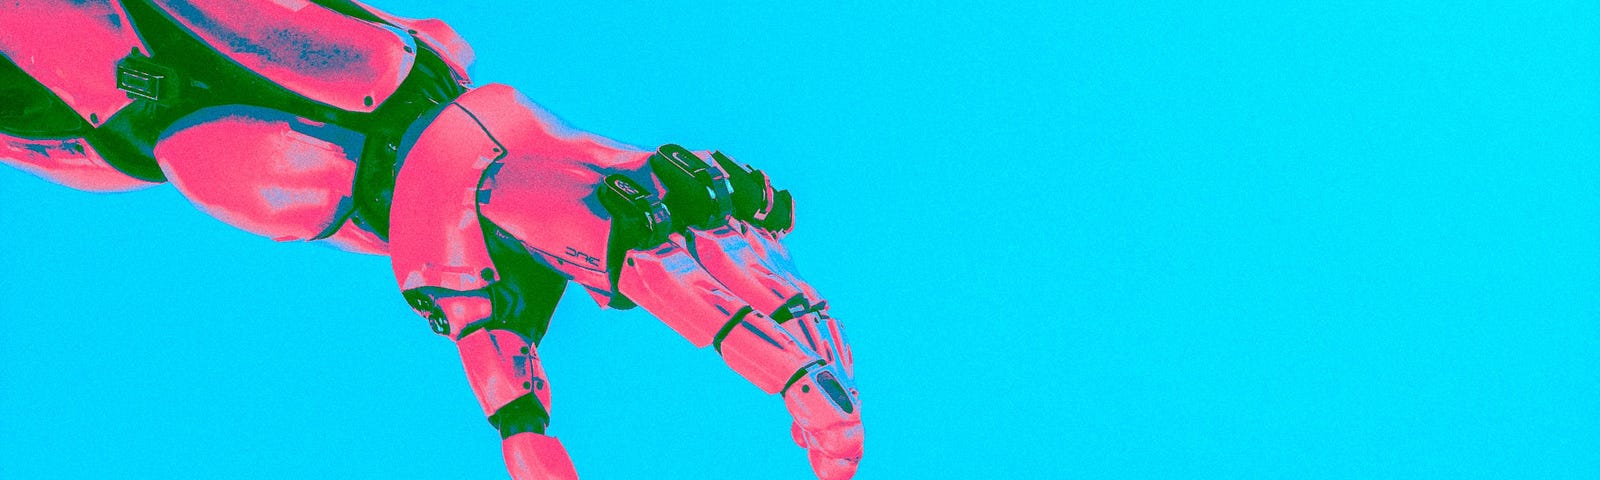 Pink Human hand reaching up to a pink and green Robot hand